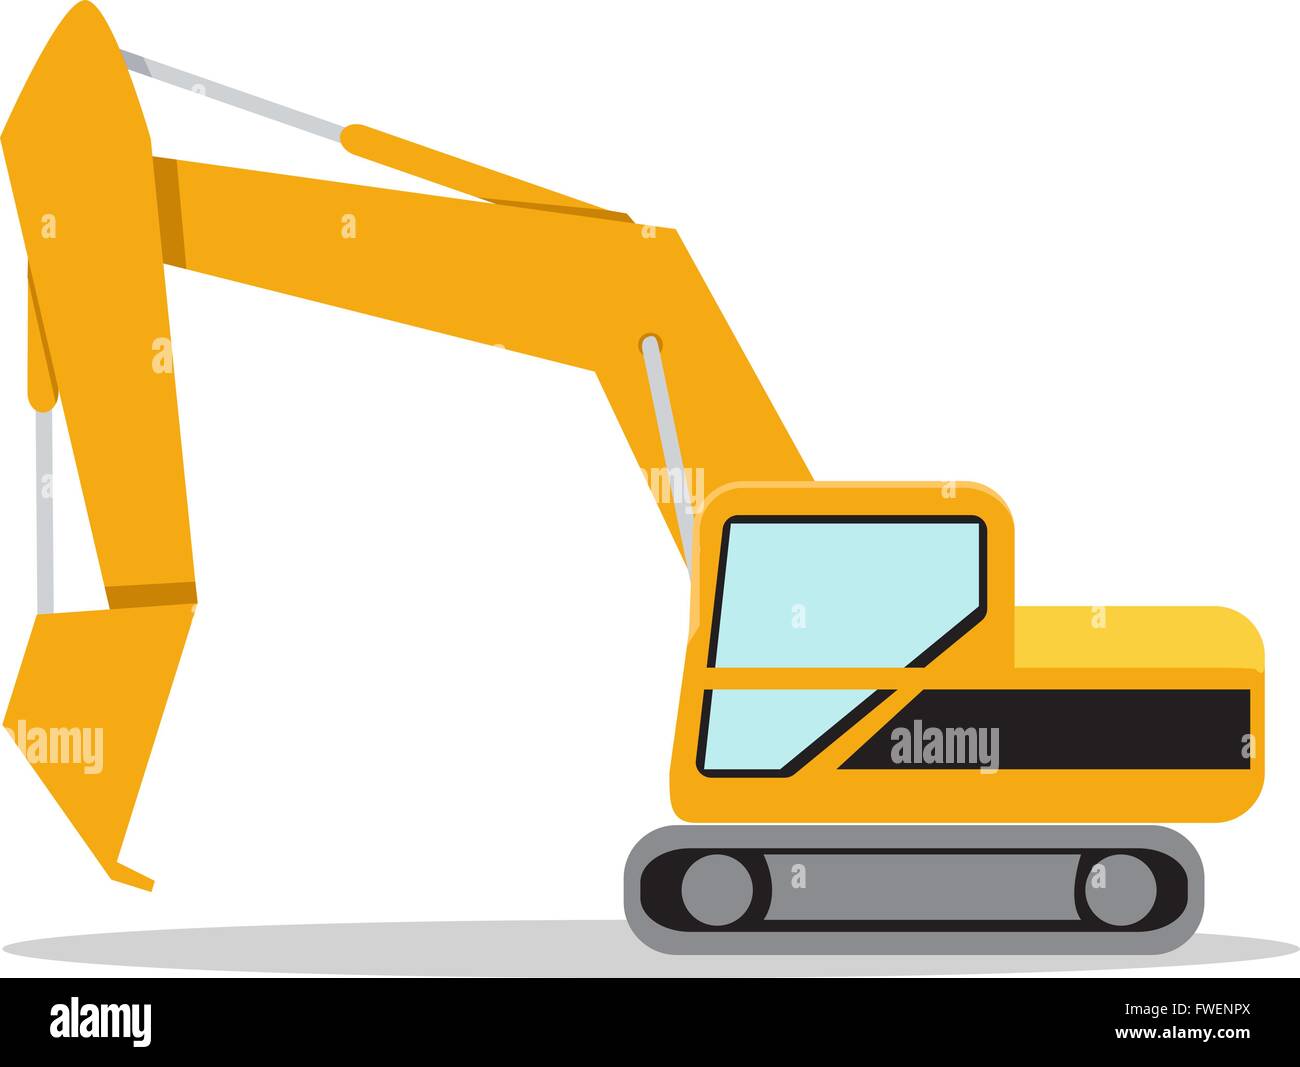 Illustration of excavator on white background, vector Stock Vector